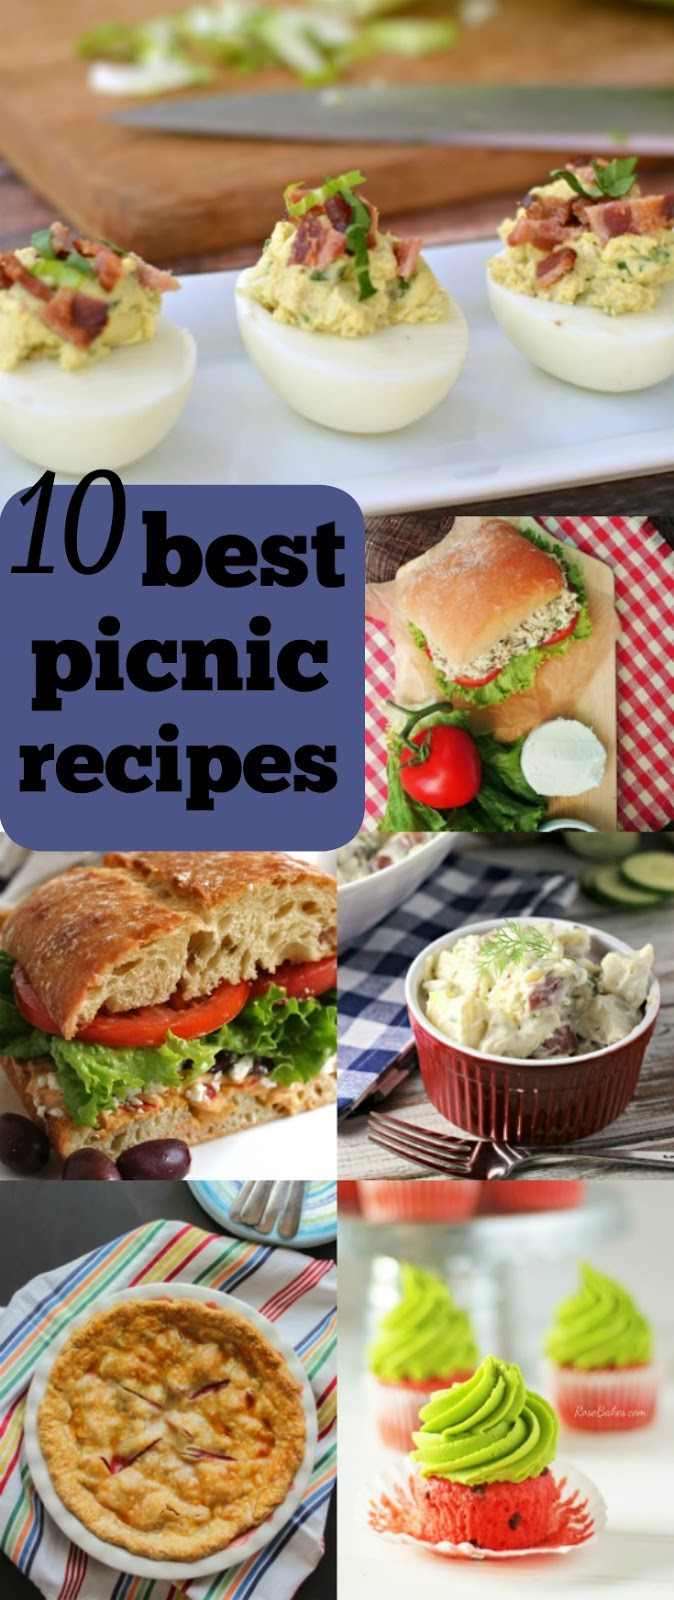 Picnic Dinner Ideas
 The Best Picnic Recipes for National Picnic Month